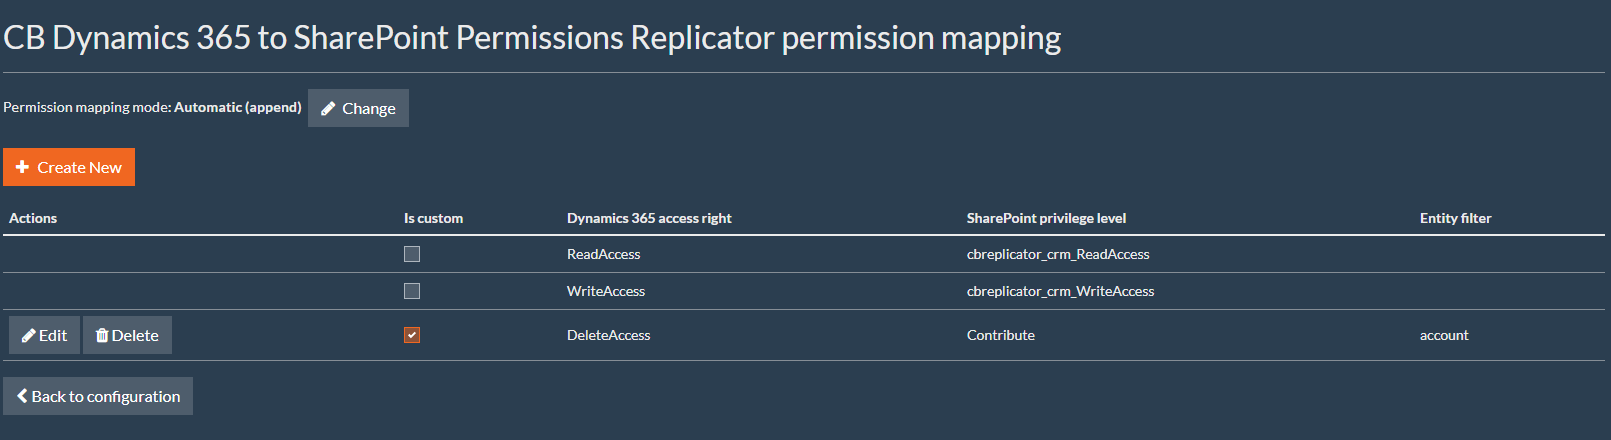 Permissions Mapping Page